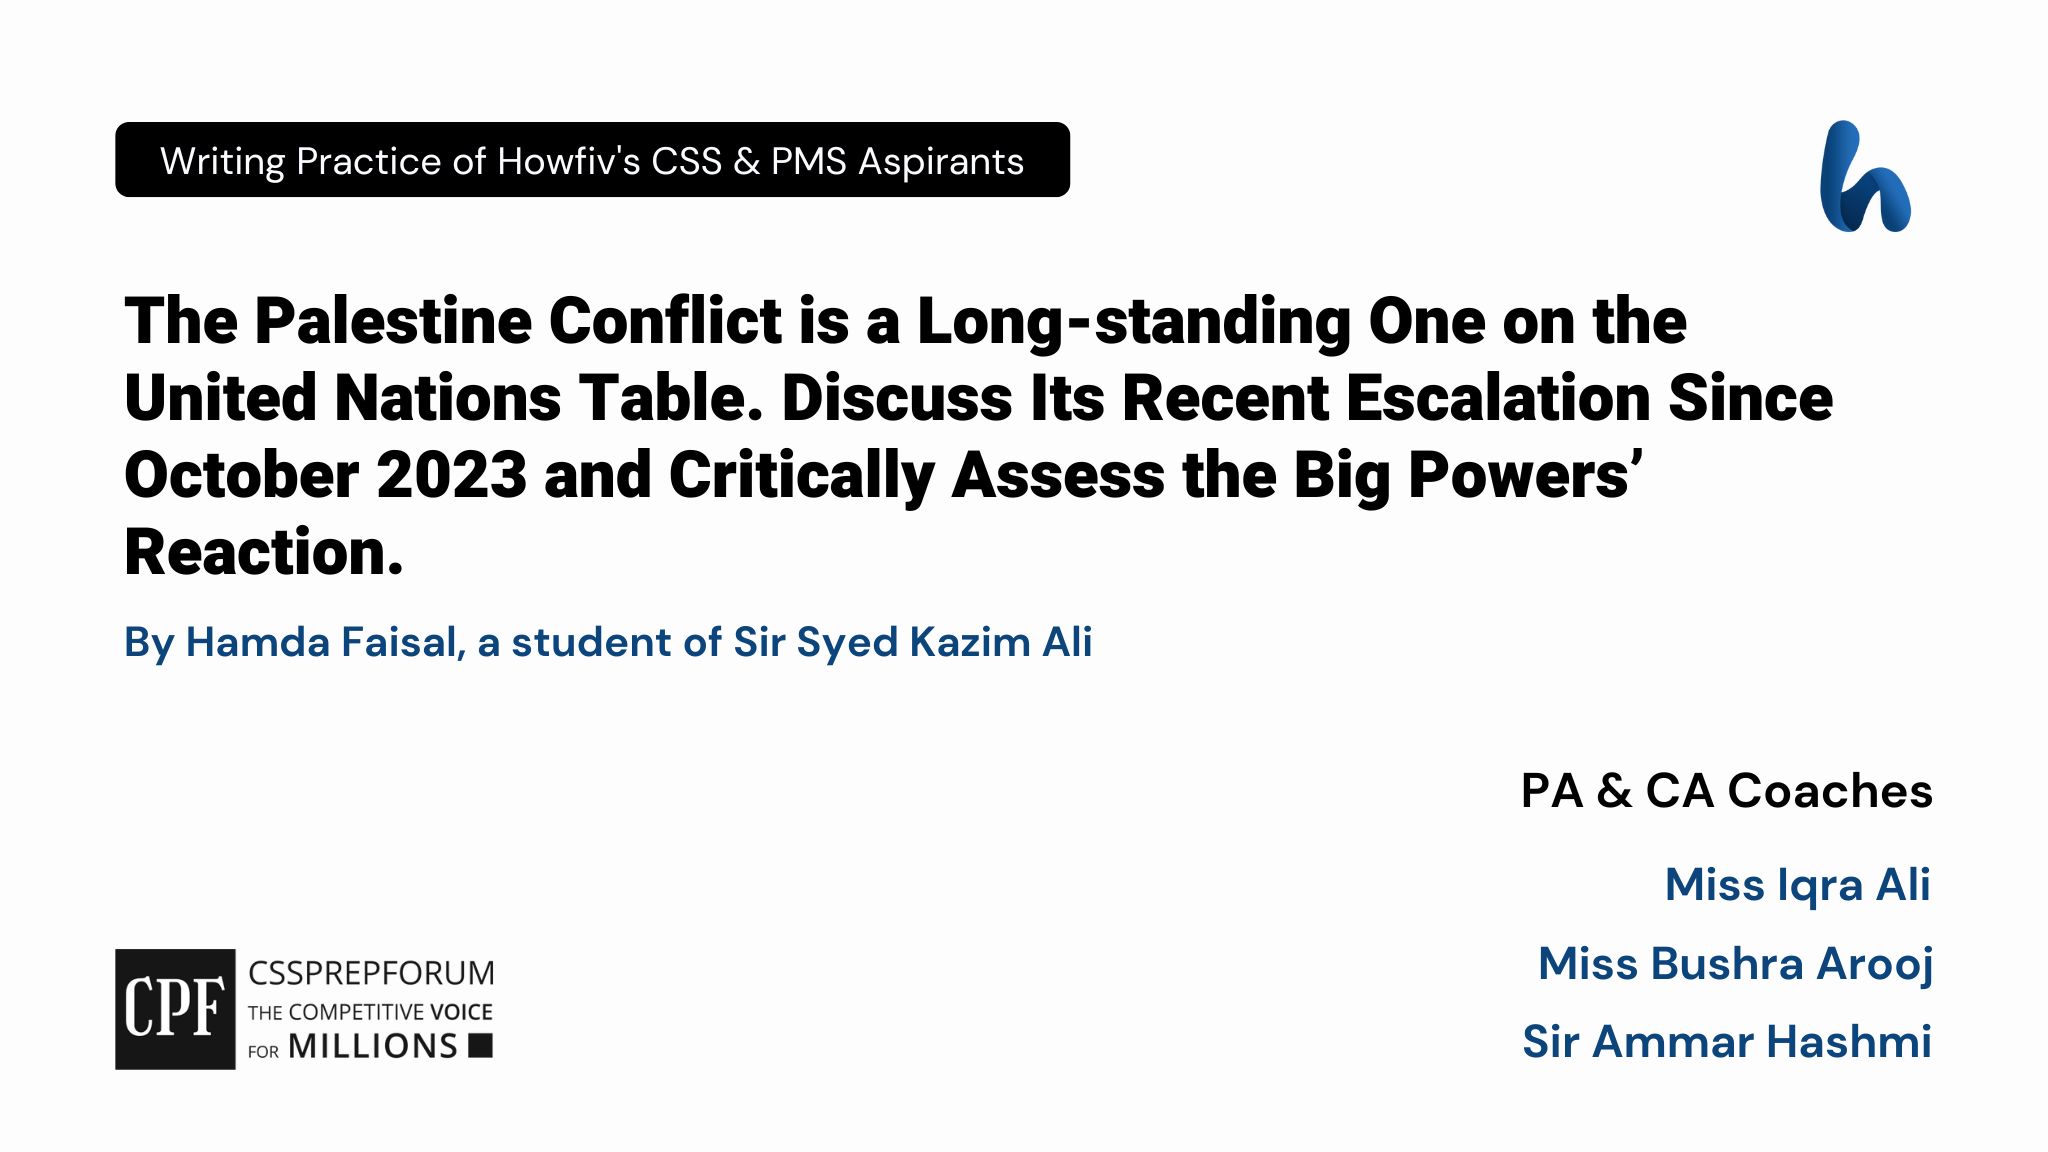 CSS Current Affairs Article | Escalation of The Current Palestine Conflict and Assessment of the Big Powers’ Reaction.| is written by Hama Faisal Under the Supervision of Sir Ammar Hashmi...